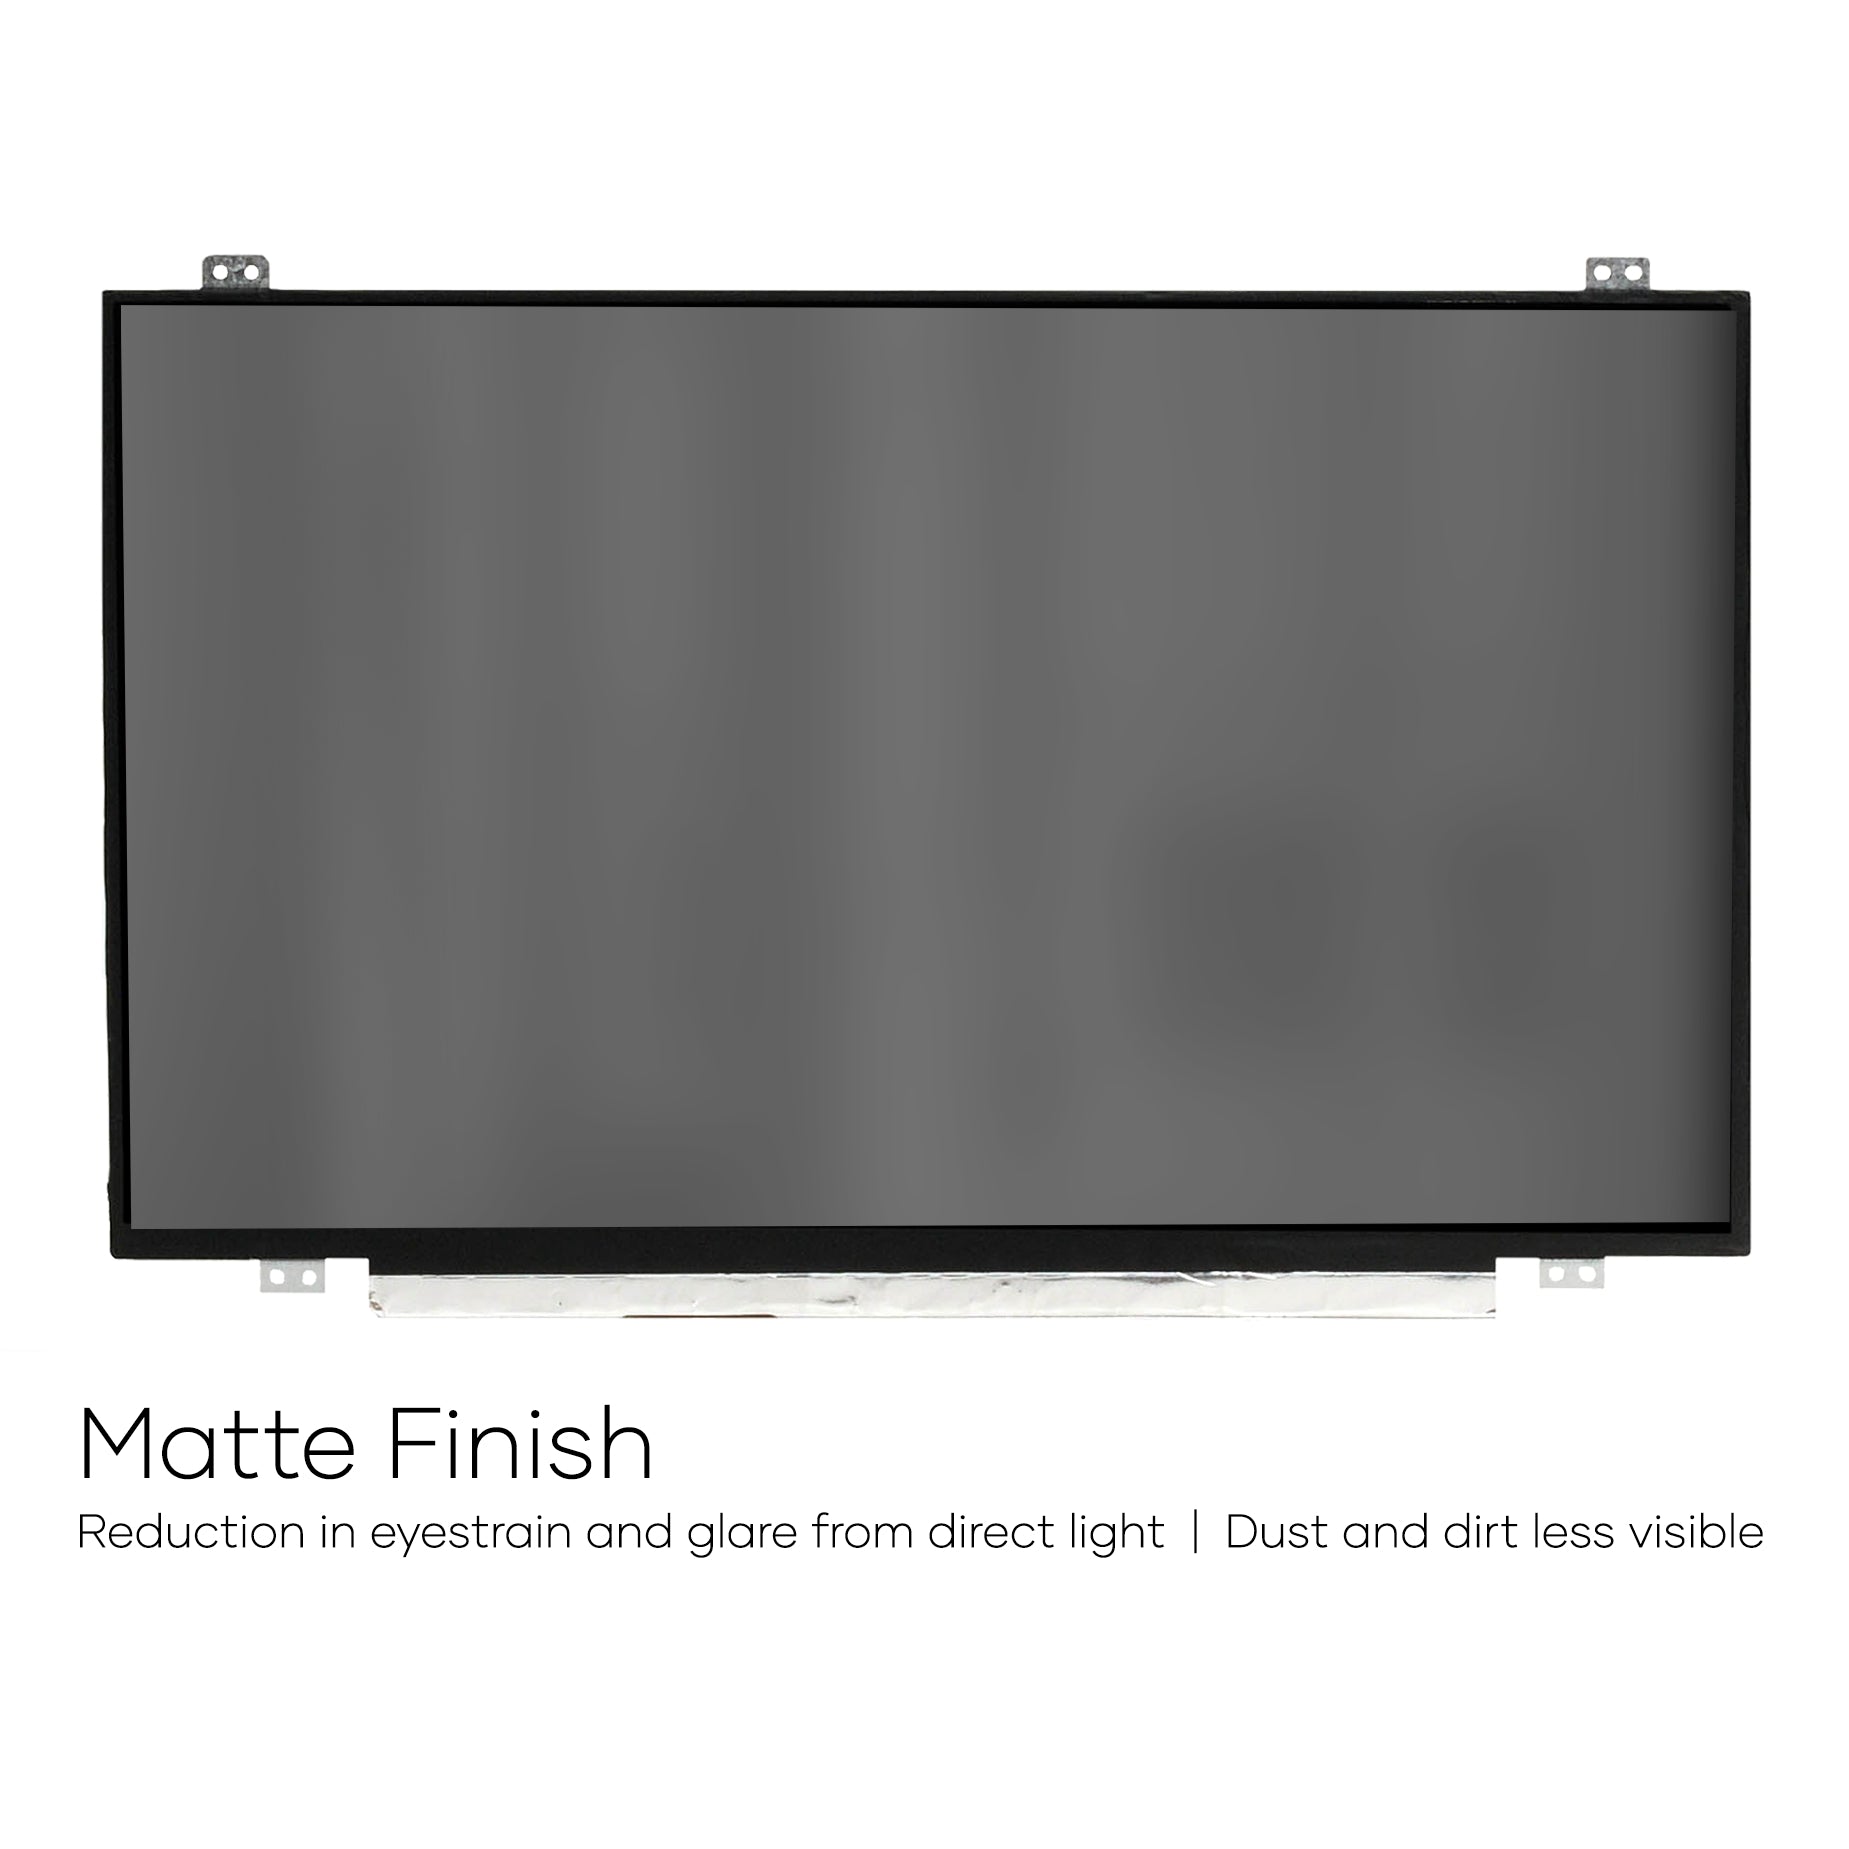 Screen Replacement for Dell P/N V1M58 D/PN 0V1M58 FHD 1920x1080 IPS Matte LCD LED Display